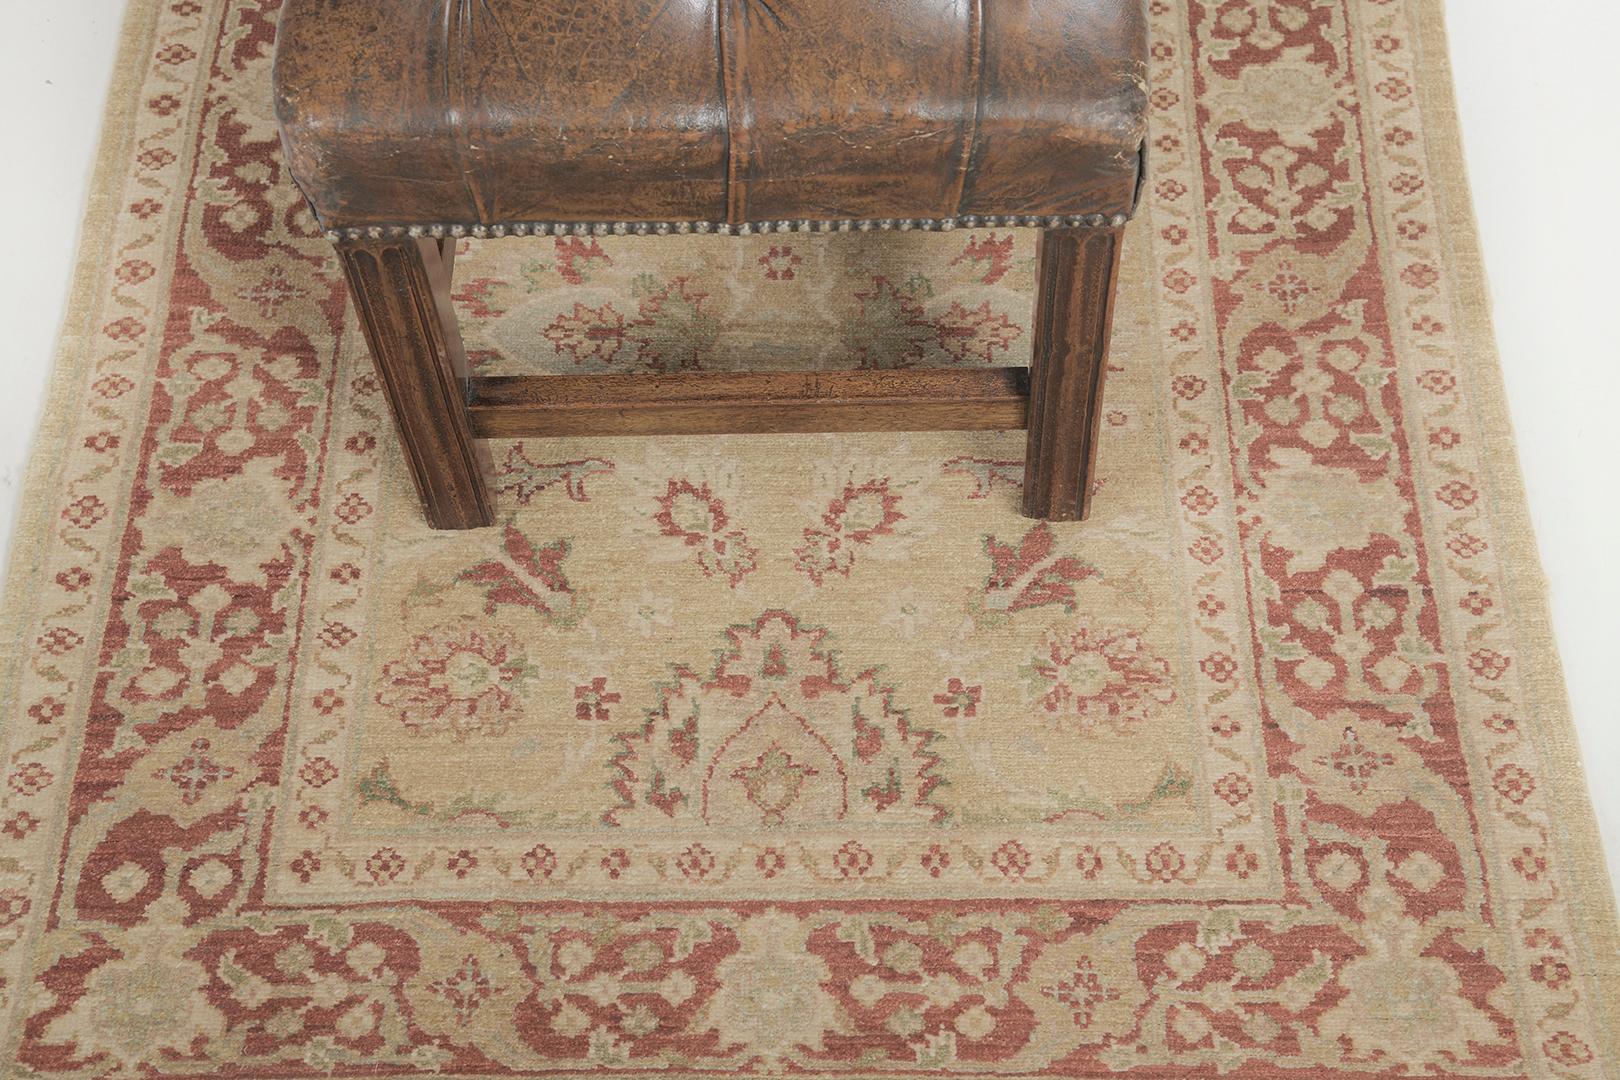 Stunning elements and florid adornments are expressed through red and gold embellishments. Surrounded by the fascinating motifs in red borders which are beautifully hand-woven that created from a vegetable dye to form a classy Sultanabad Runner.